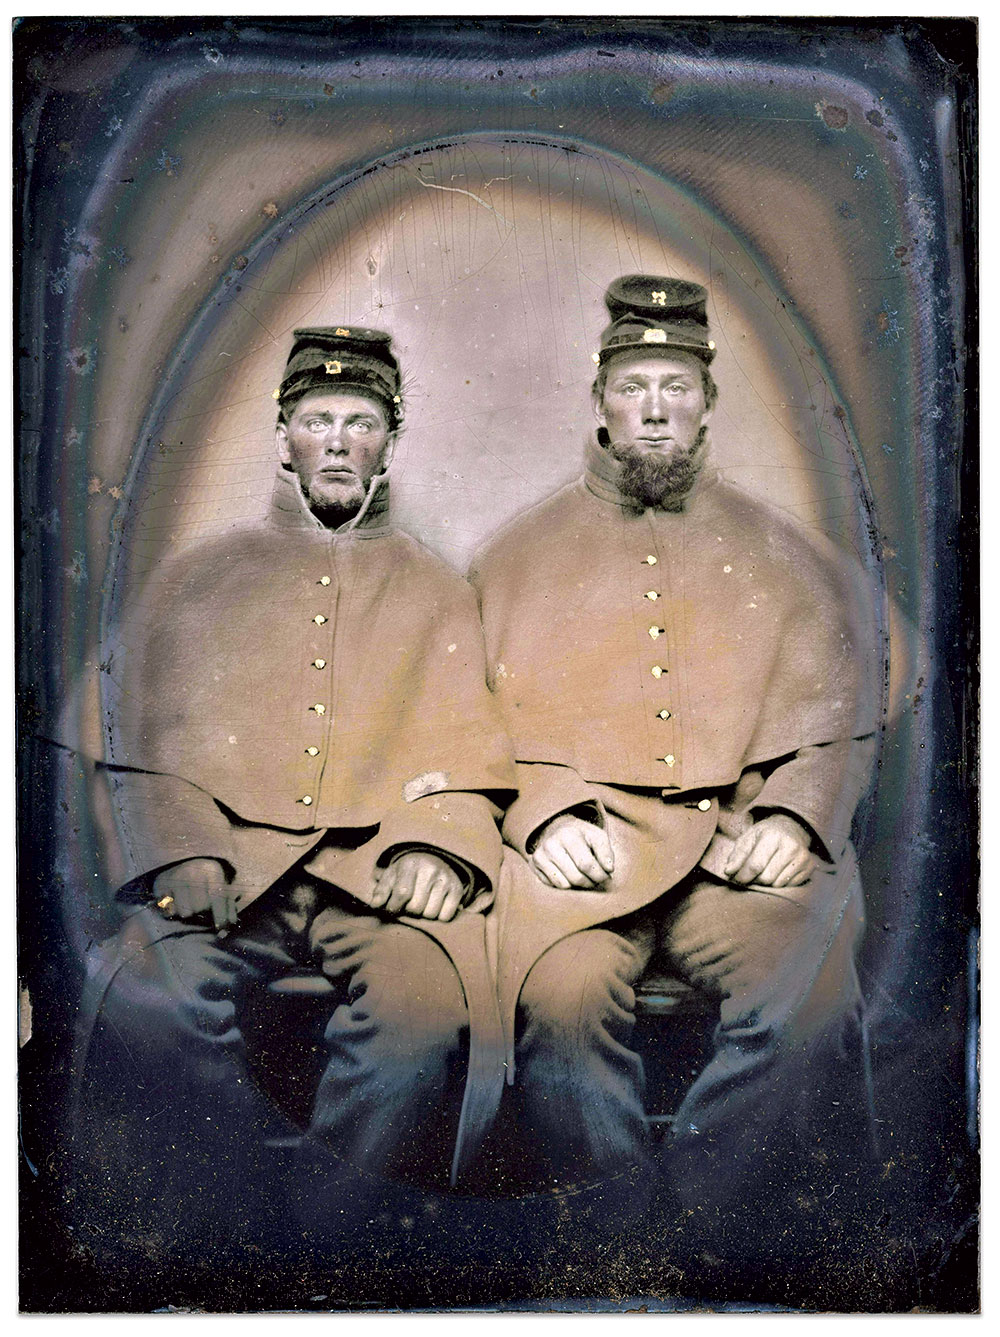 Quarter plate tintype by an unidentified photographer. John Wernick Collection.